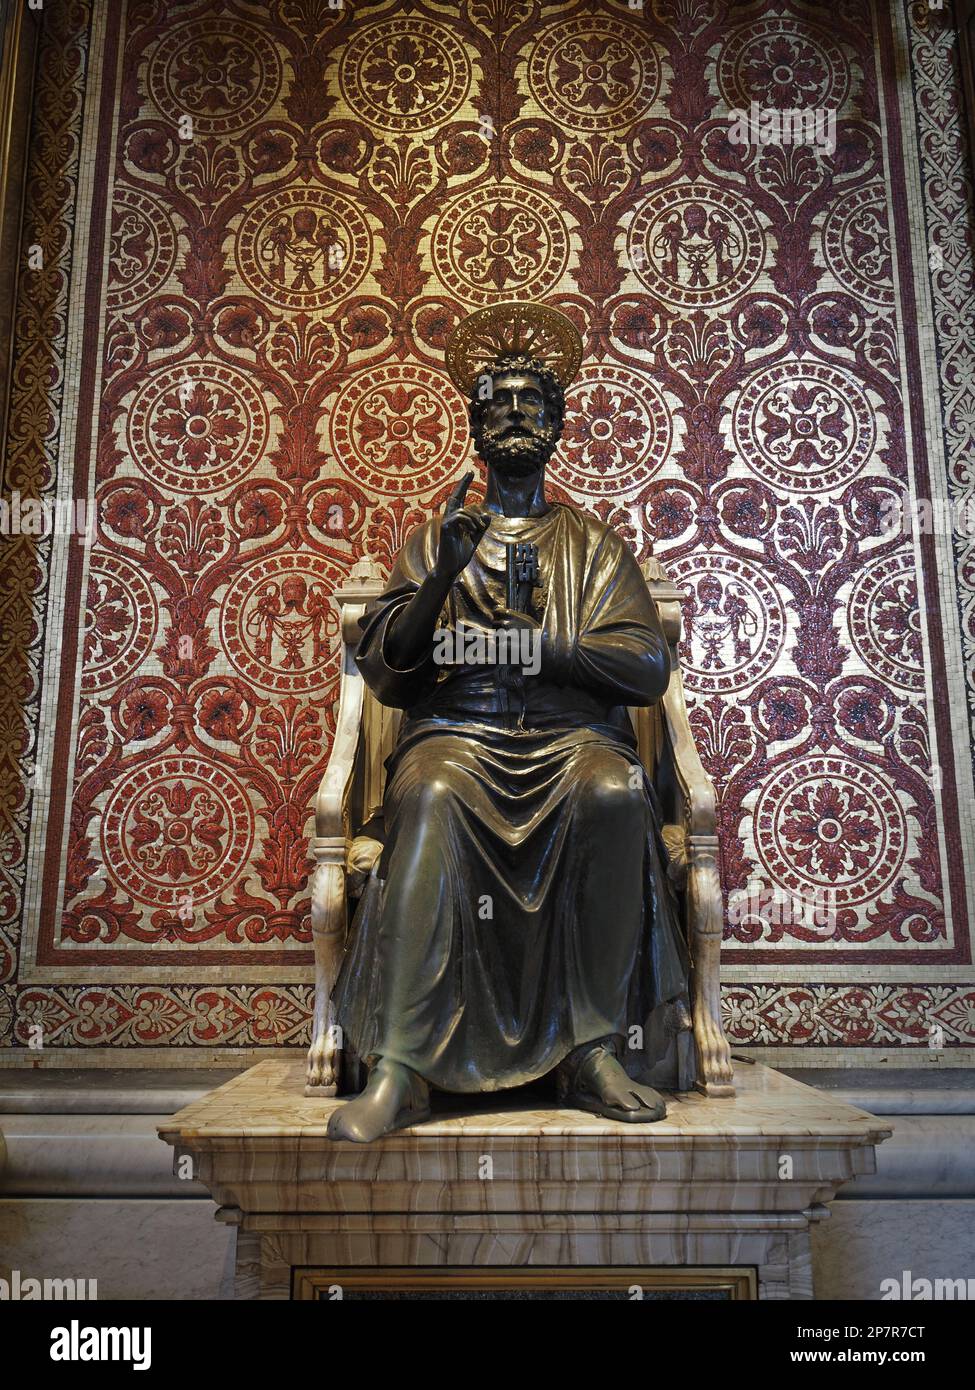 Bronze statue of Saint Peter in St. Peters Basilica in the Vatican. He can always be recognized by the keys to heaven he is holding. Notice his feet a Stock Photo